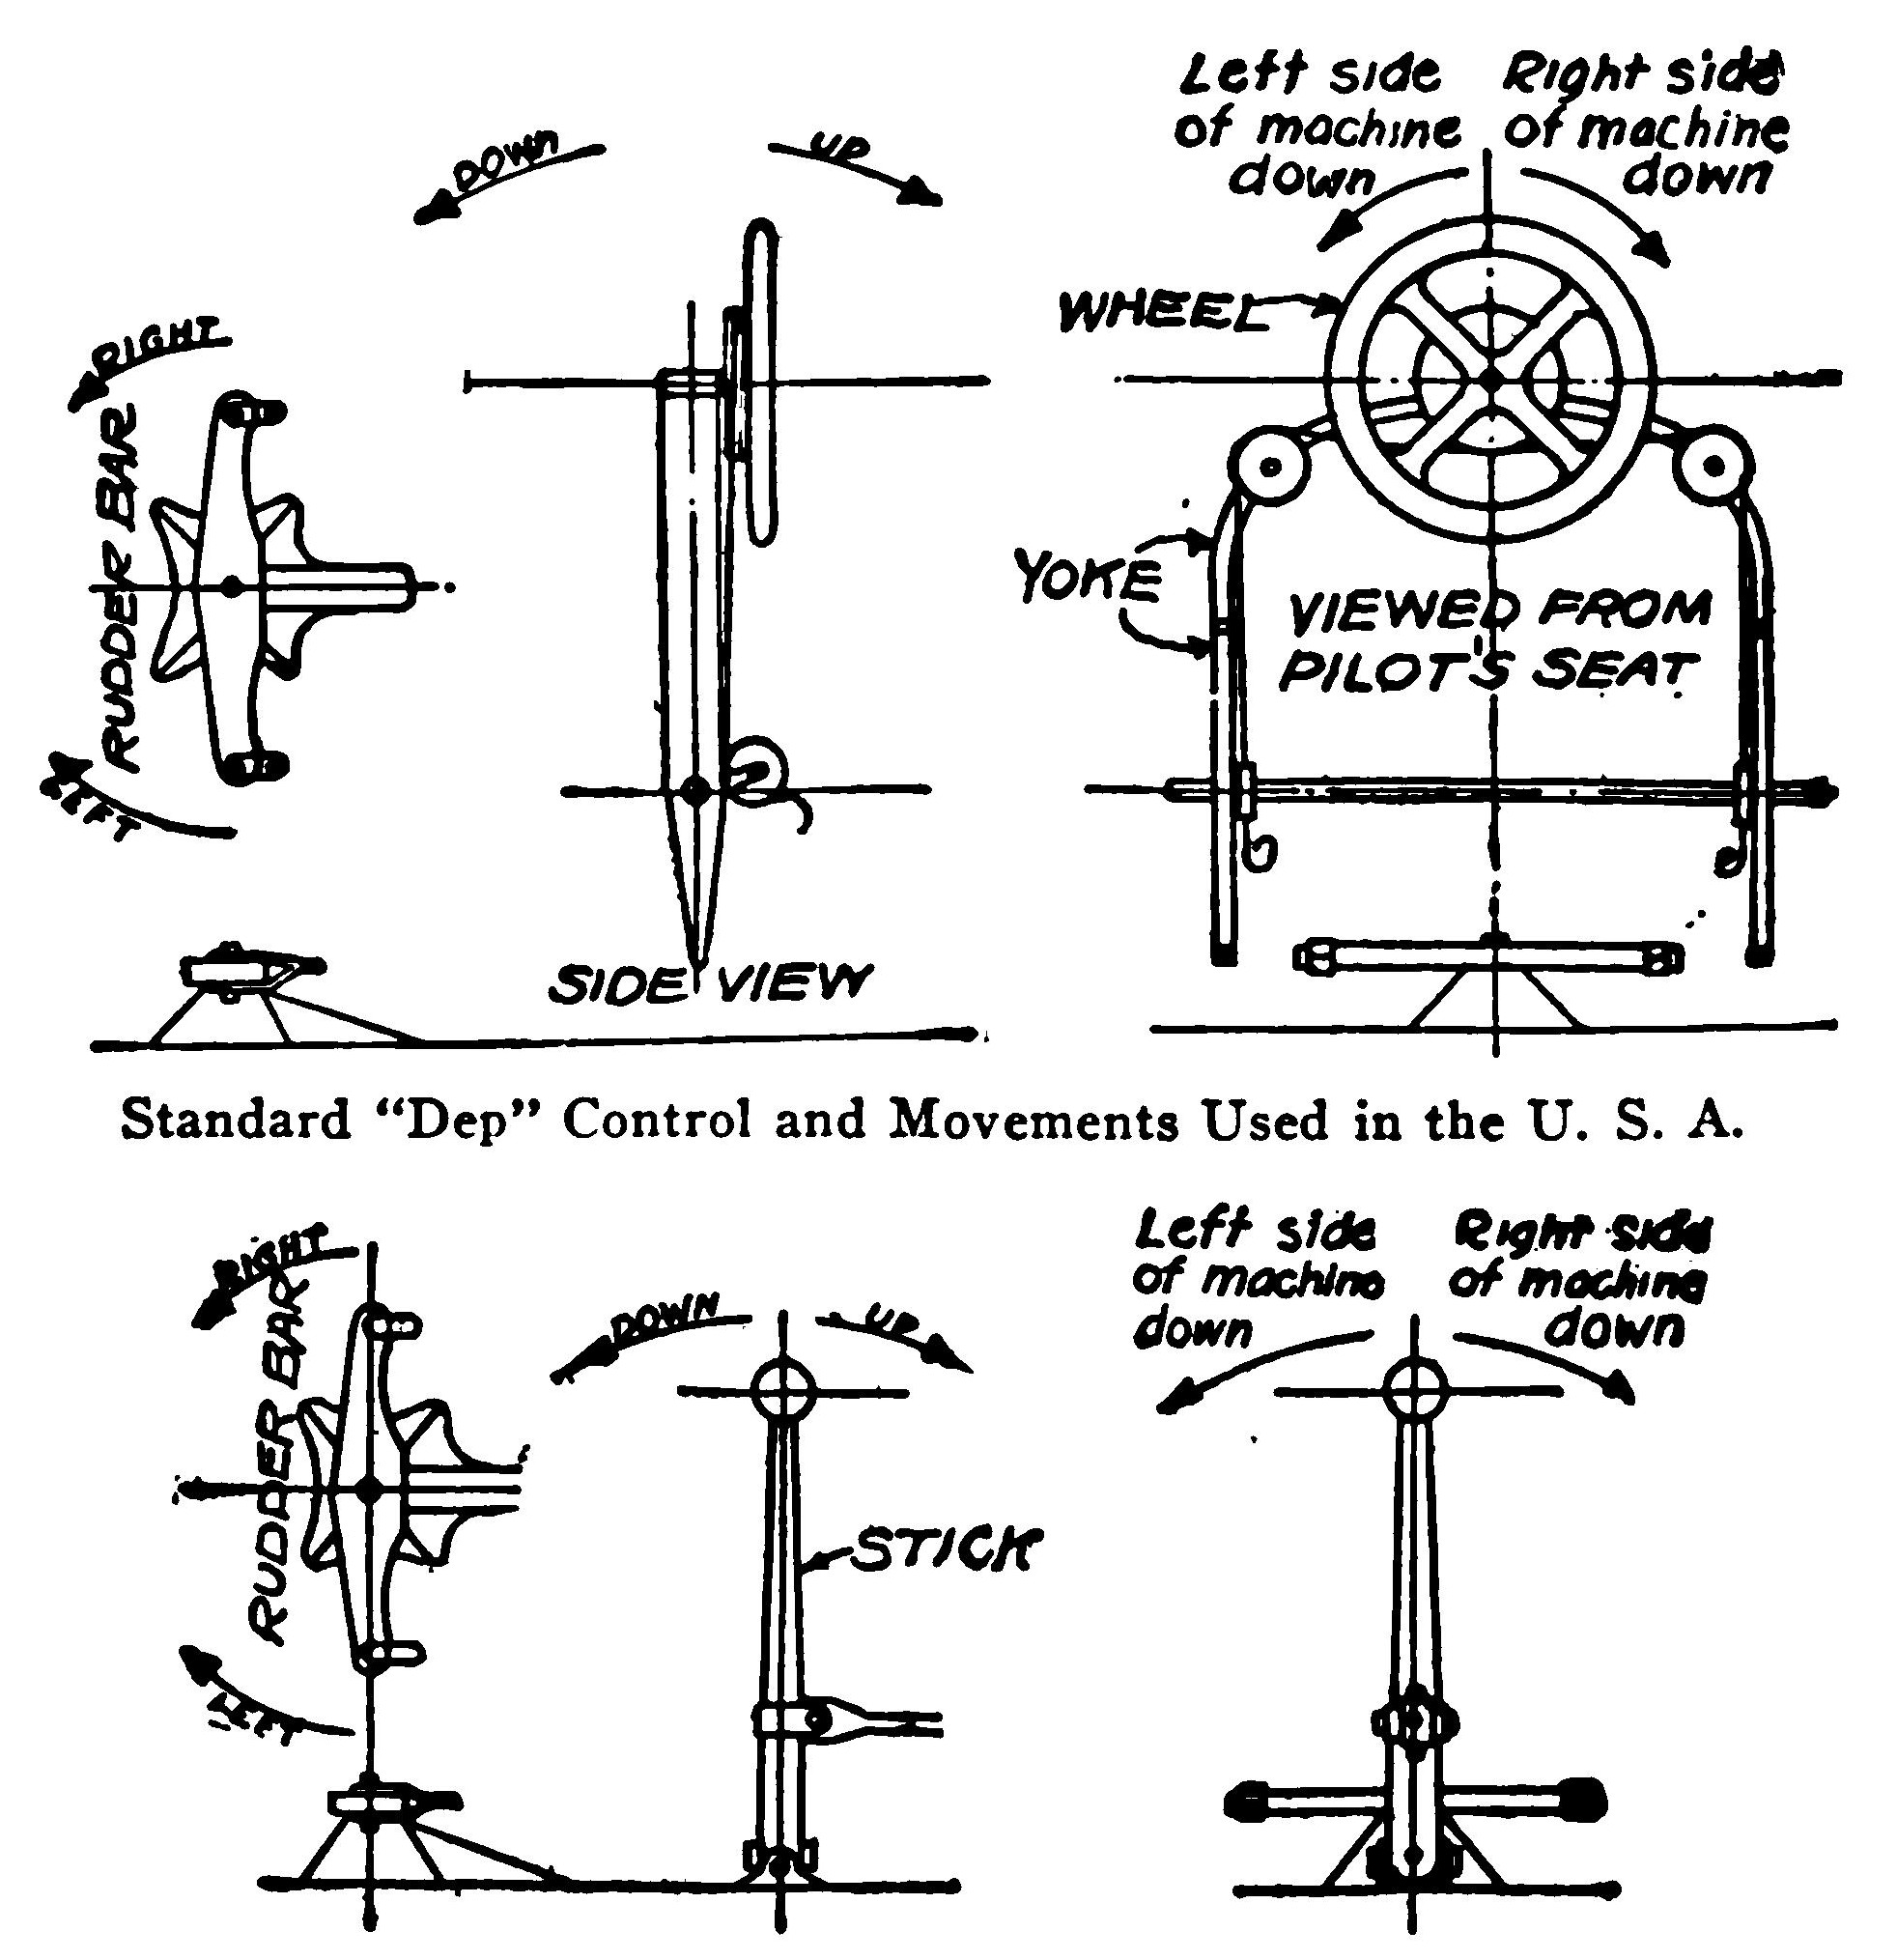 Standard Stick Control and Movements Used in the U.S.A.